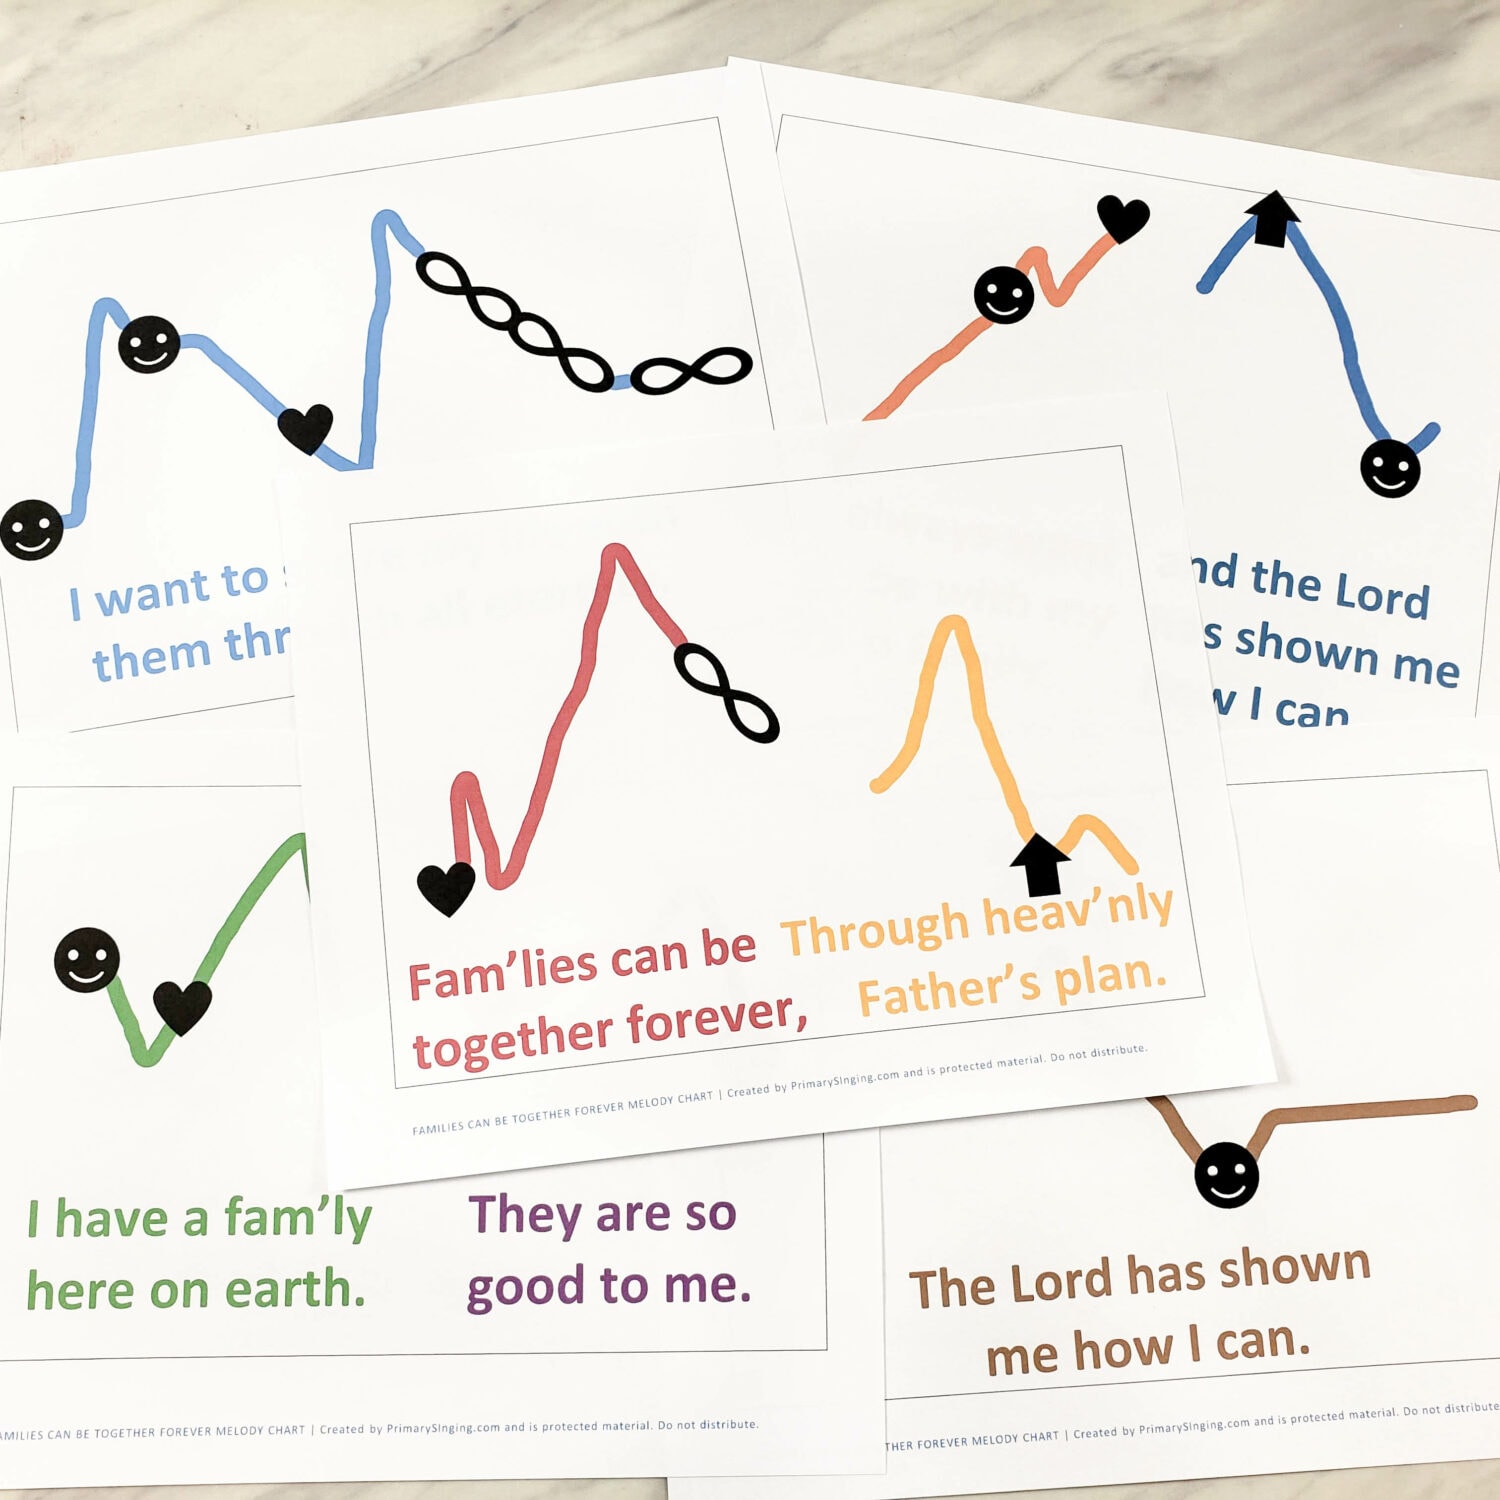 Families Can Be Together Forever melody chart easy and fun singing time ideas to teach this song for LDS Primary music leaders